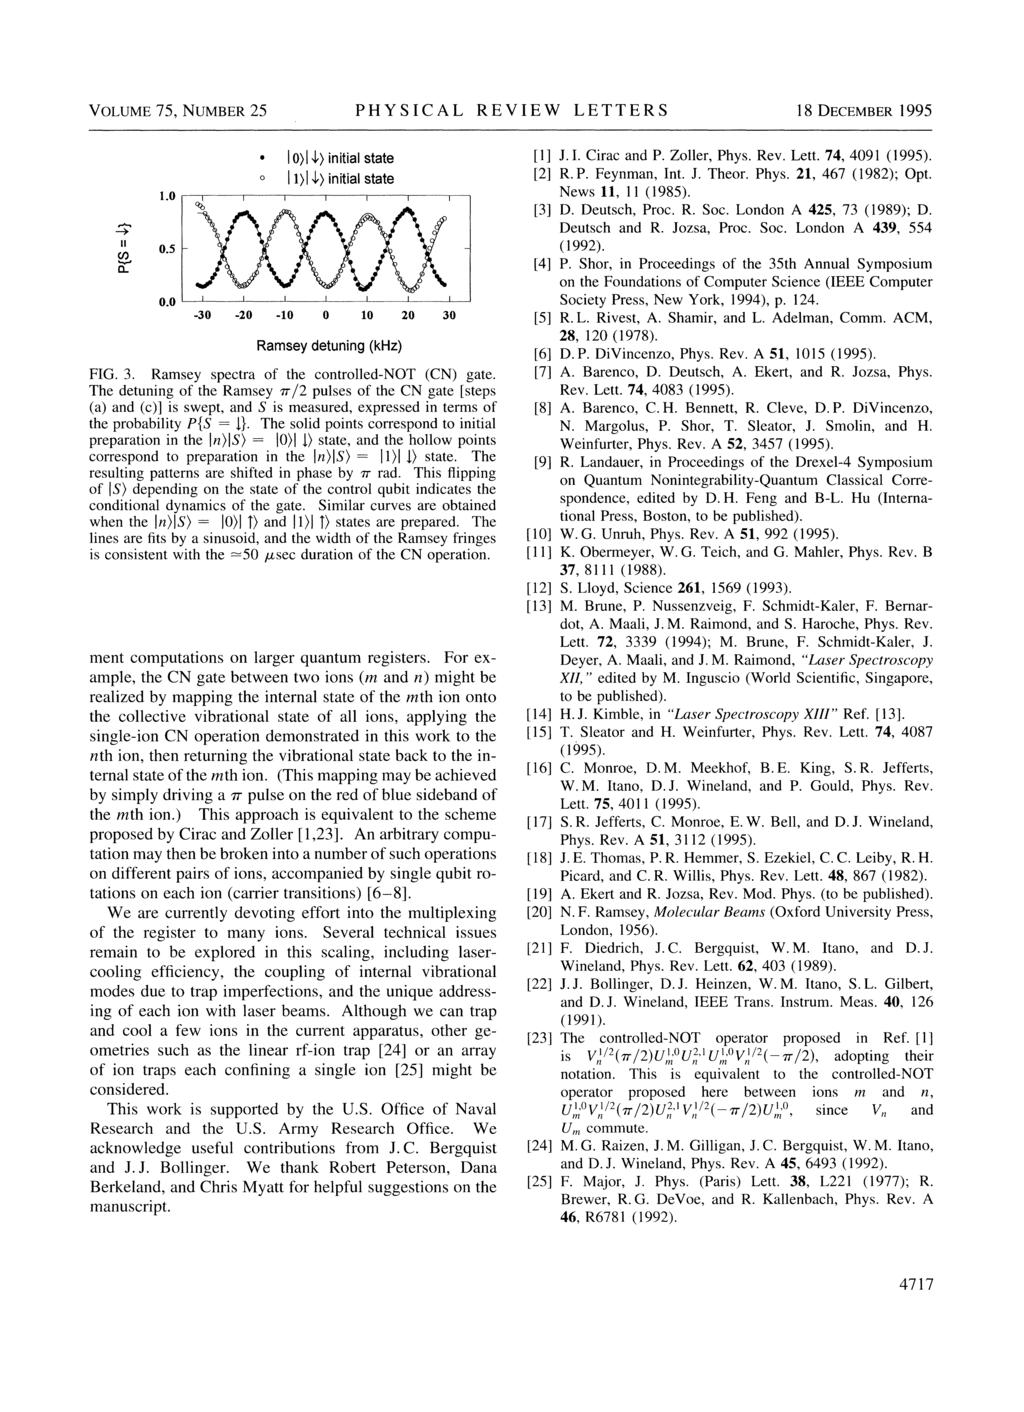 ' VOLUME 75, NUMBER 5 PHYSICAL REVIEW LETTERS 18 DECEMBER 1995 Il CO CL 1.0 0.5 0.0 ~ 10&l I& initial state I 1)I 4& initial state -30-0 -10 10 0 30 Ramsey detuning (khz) FIG. 3. Ramsey spectra of the controlled-not (CN) gate.